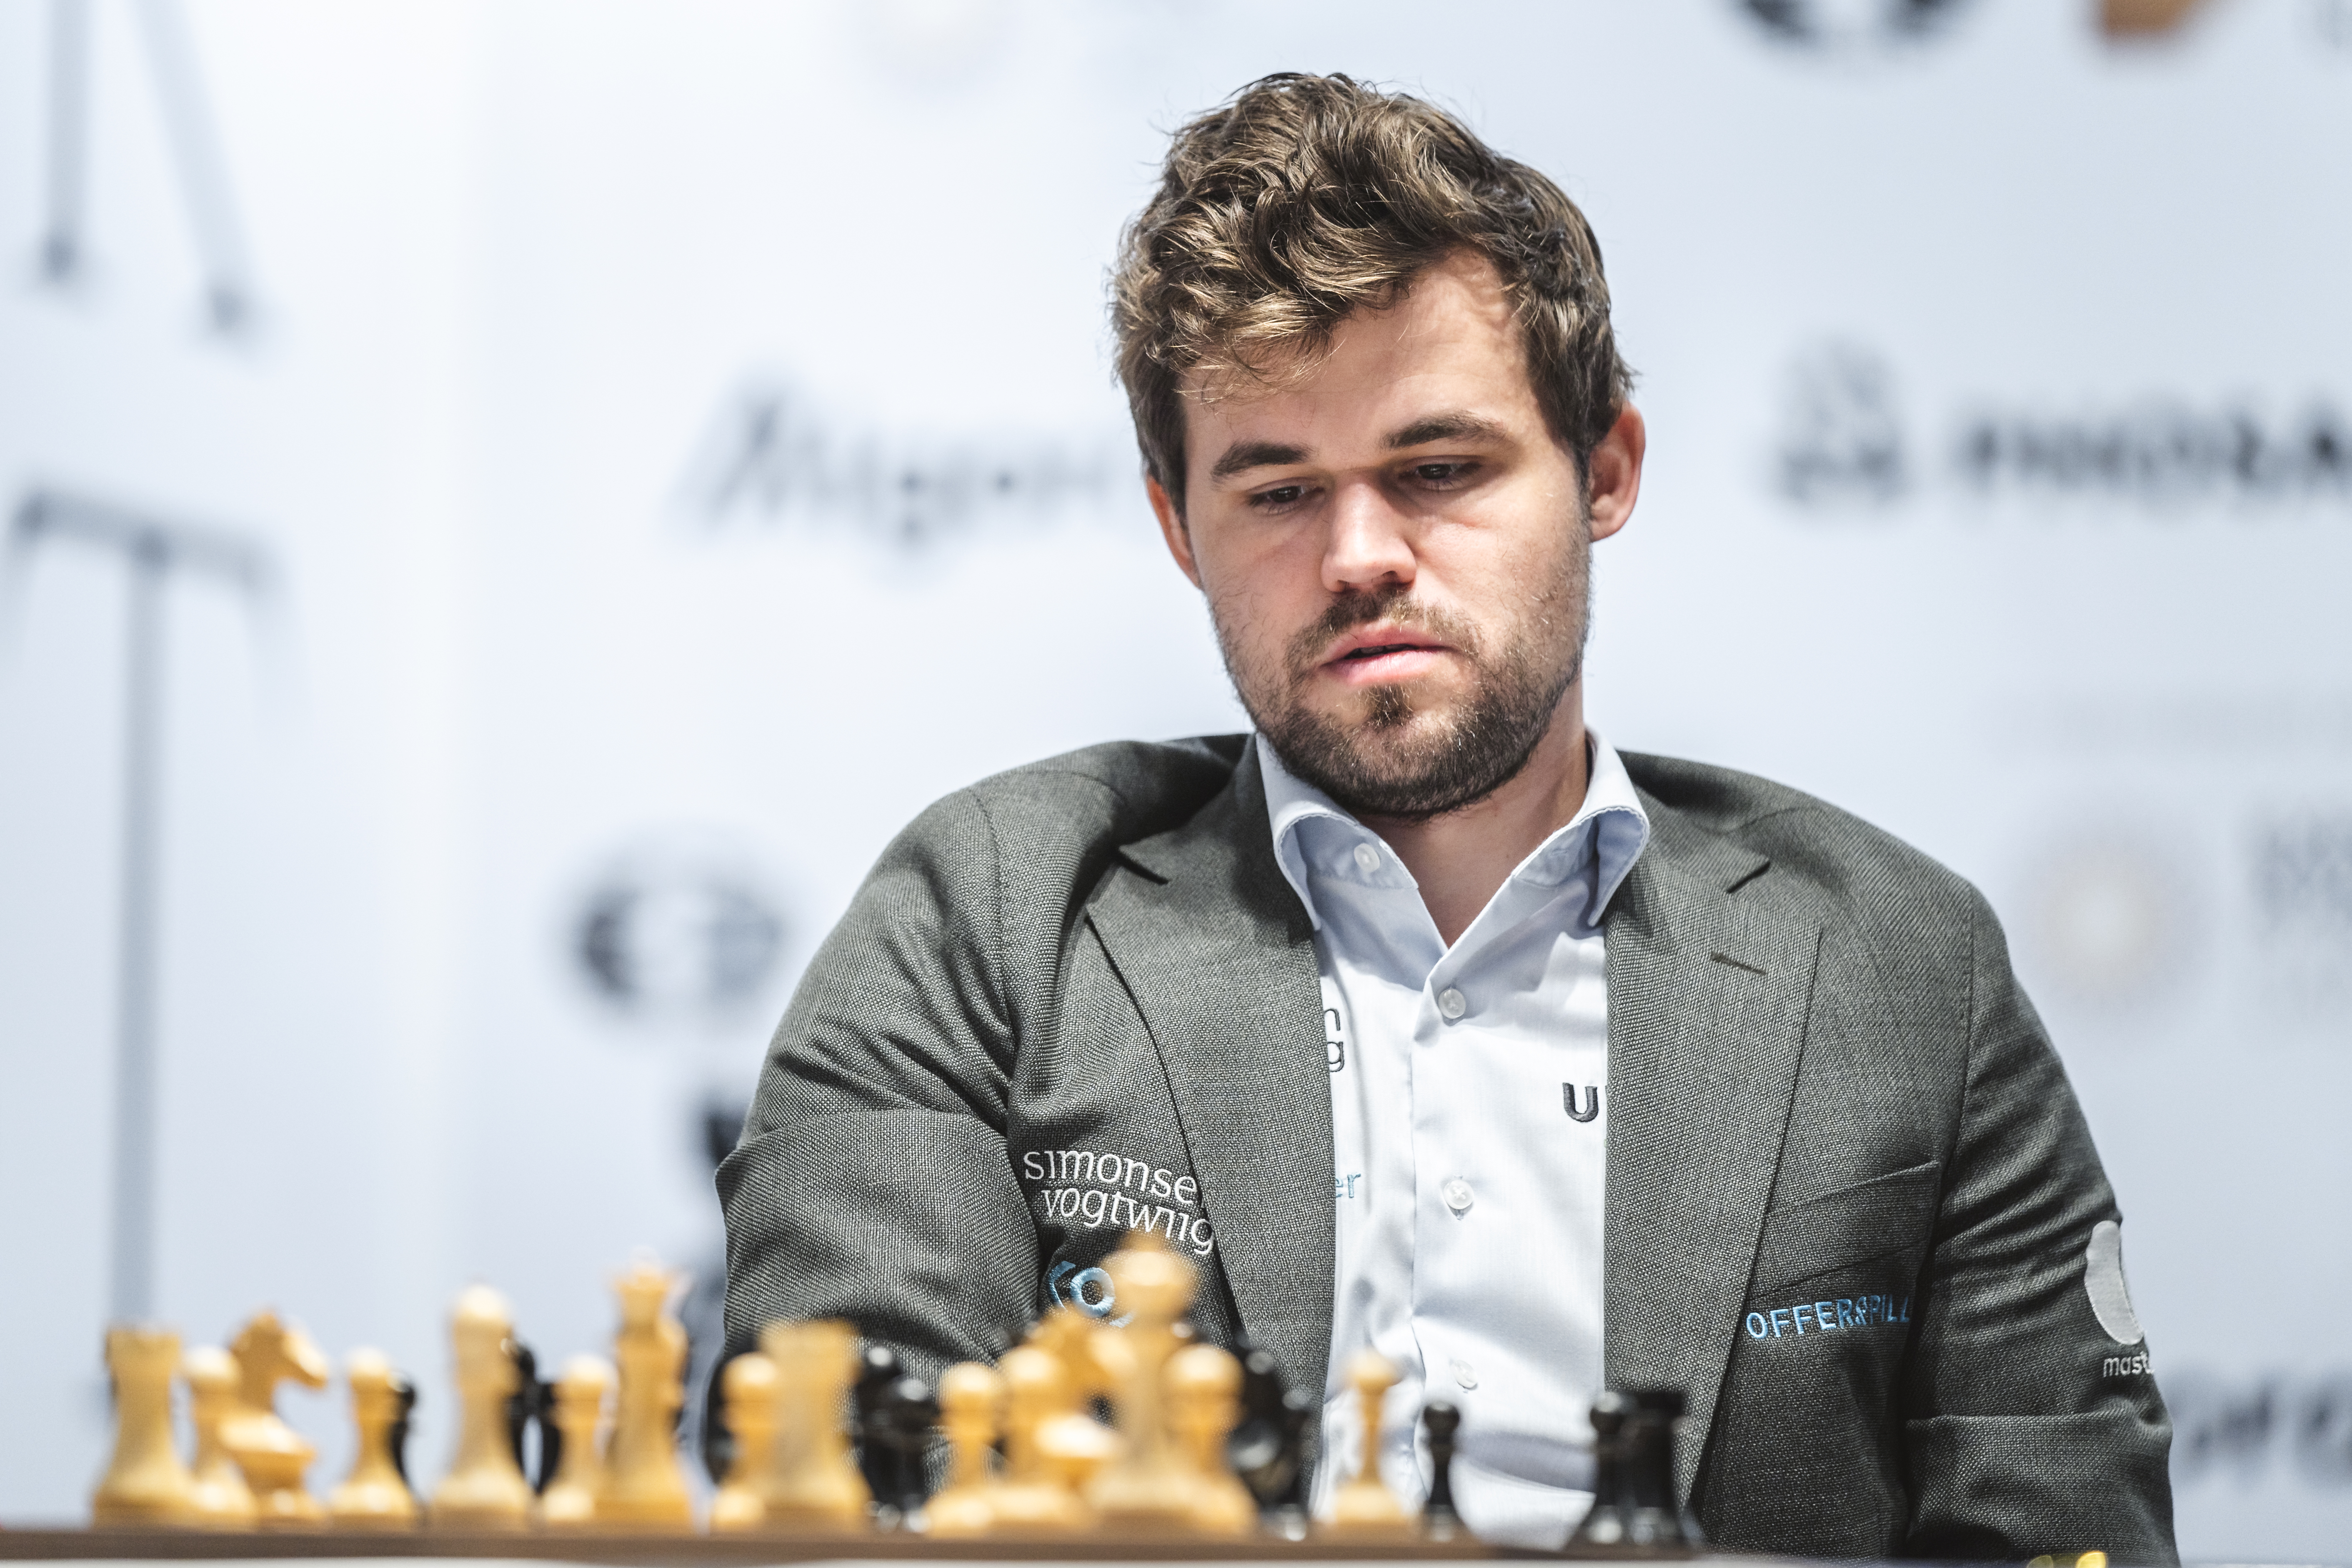 January 2020 World Chess Ratings - Magnus Carlsen now Classical